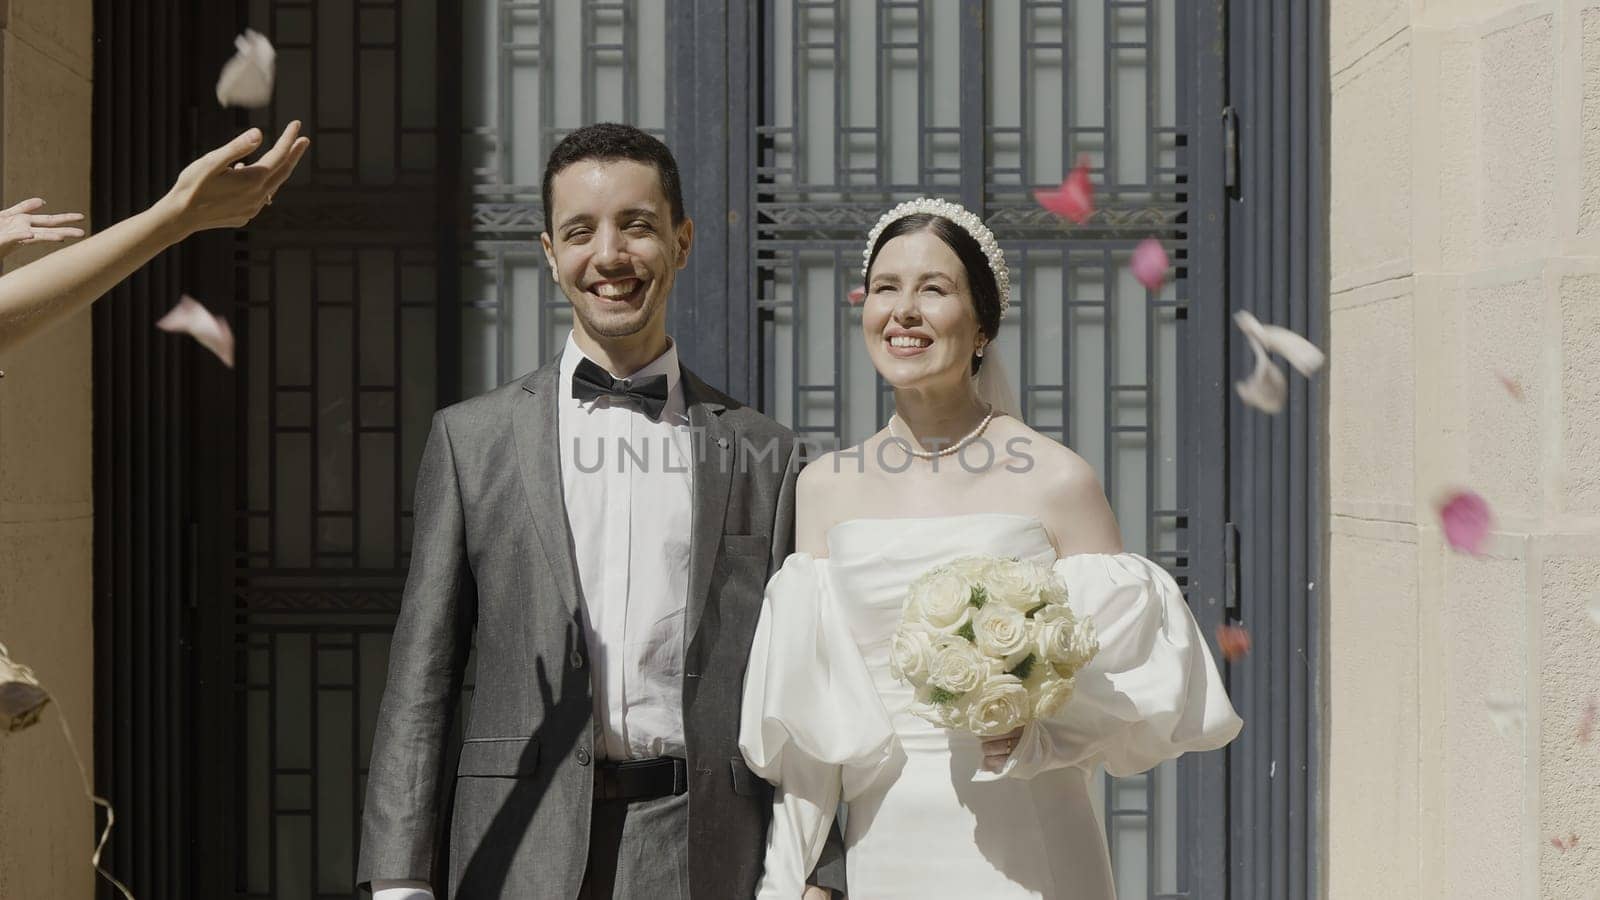 A wedding party with happy faces. Action. The newlyweds on whom the rose petals are thrown pose and smile brightly next to the registry office. High quality 4k footage